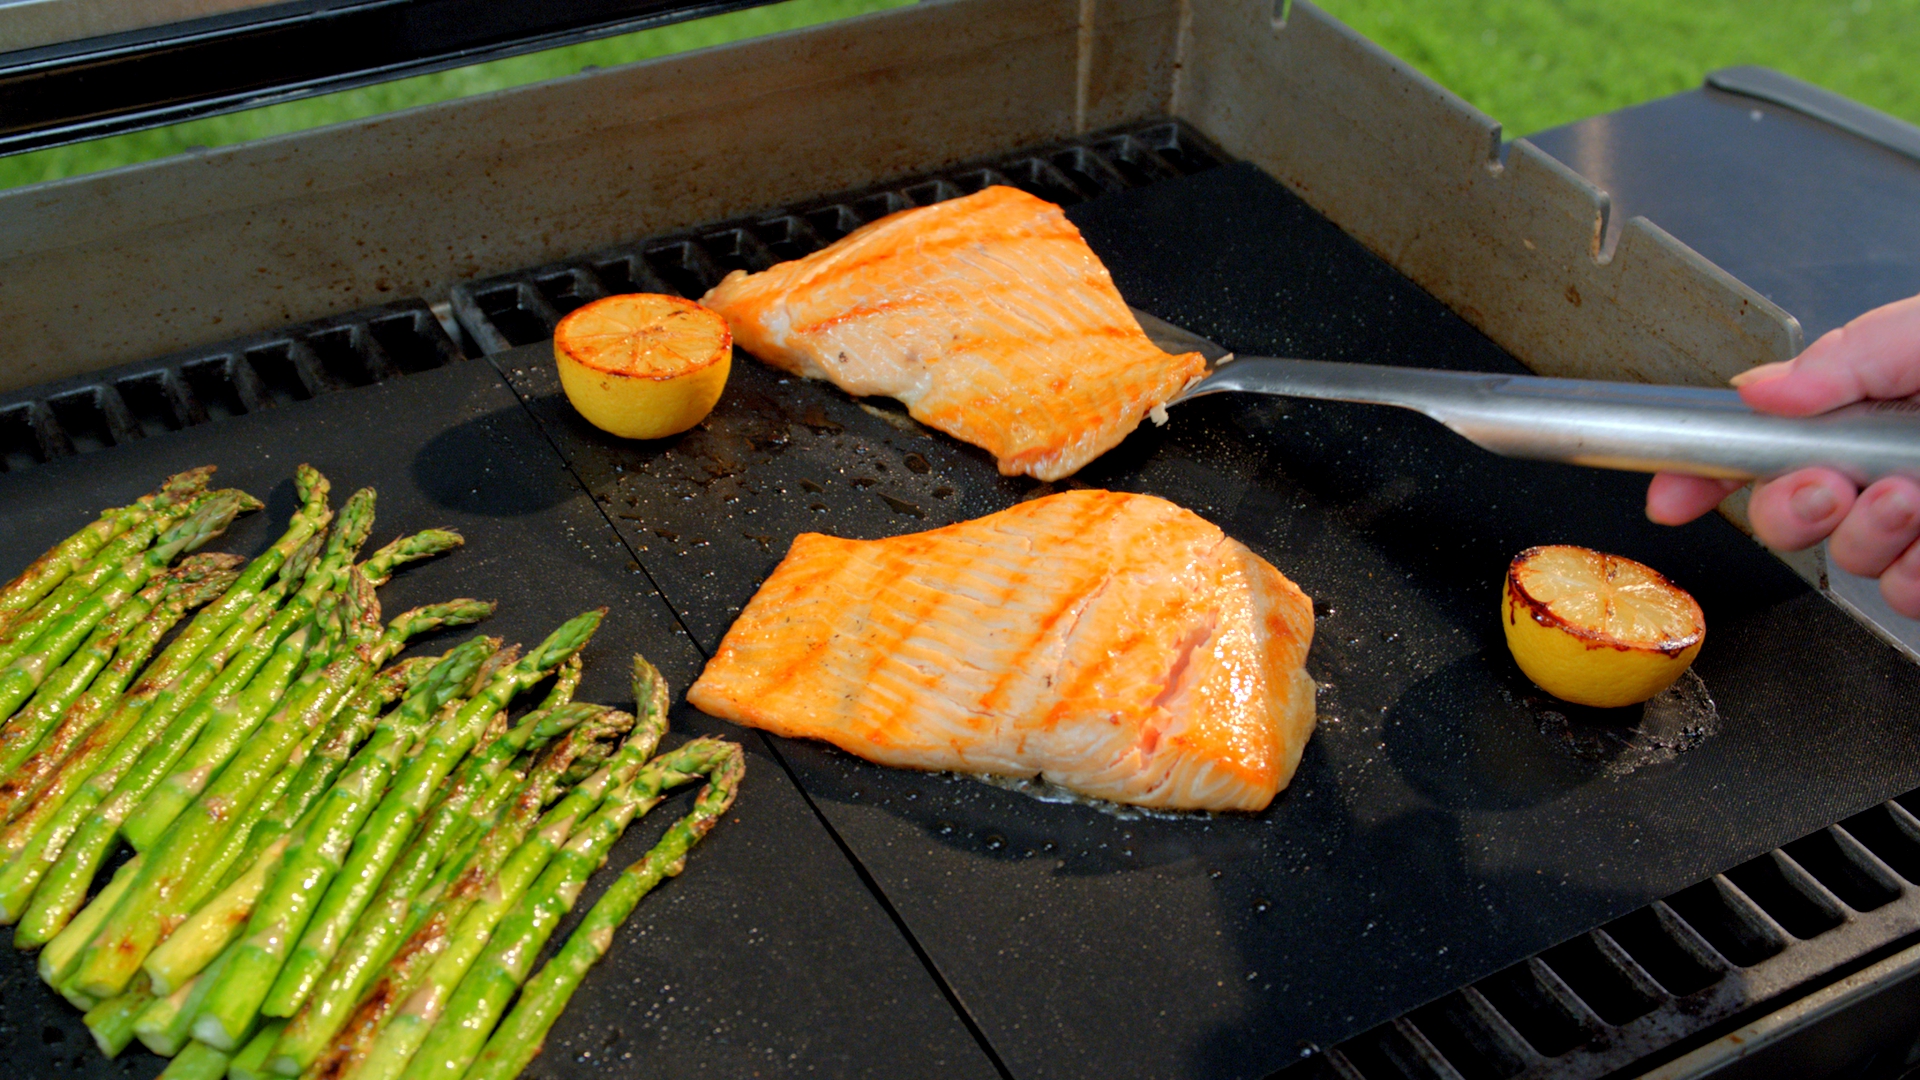 The original Miracle Grill Mat not only wipes clean but also delivers grilling perfection, ensuring meat, fish and veggies won’t stick or fall into the grill.